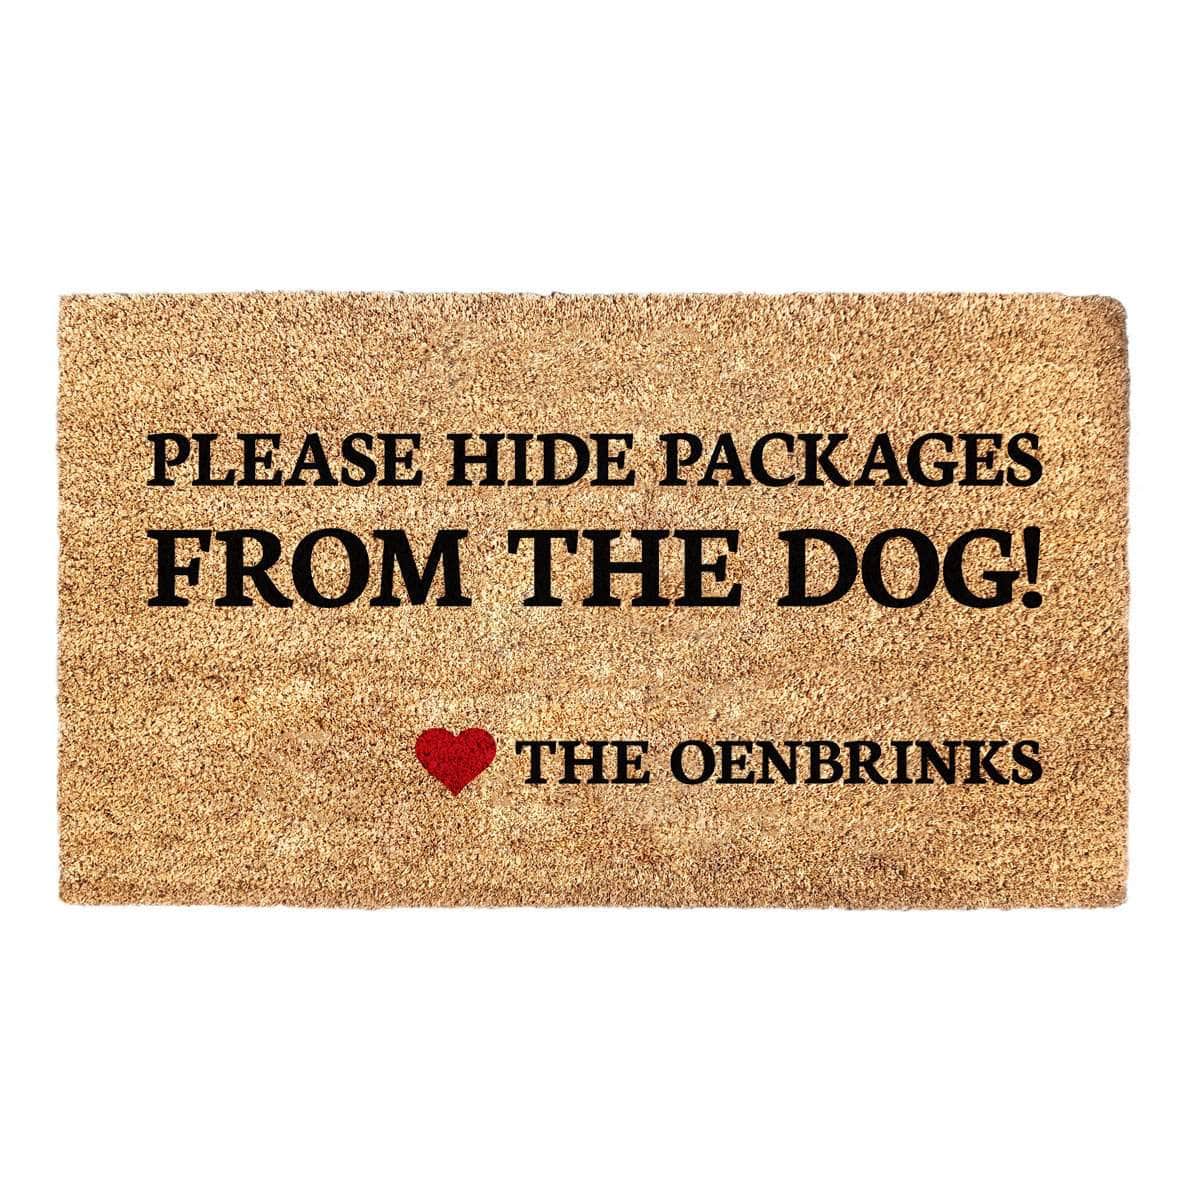 Hide Packages From the Dog! - Doormat